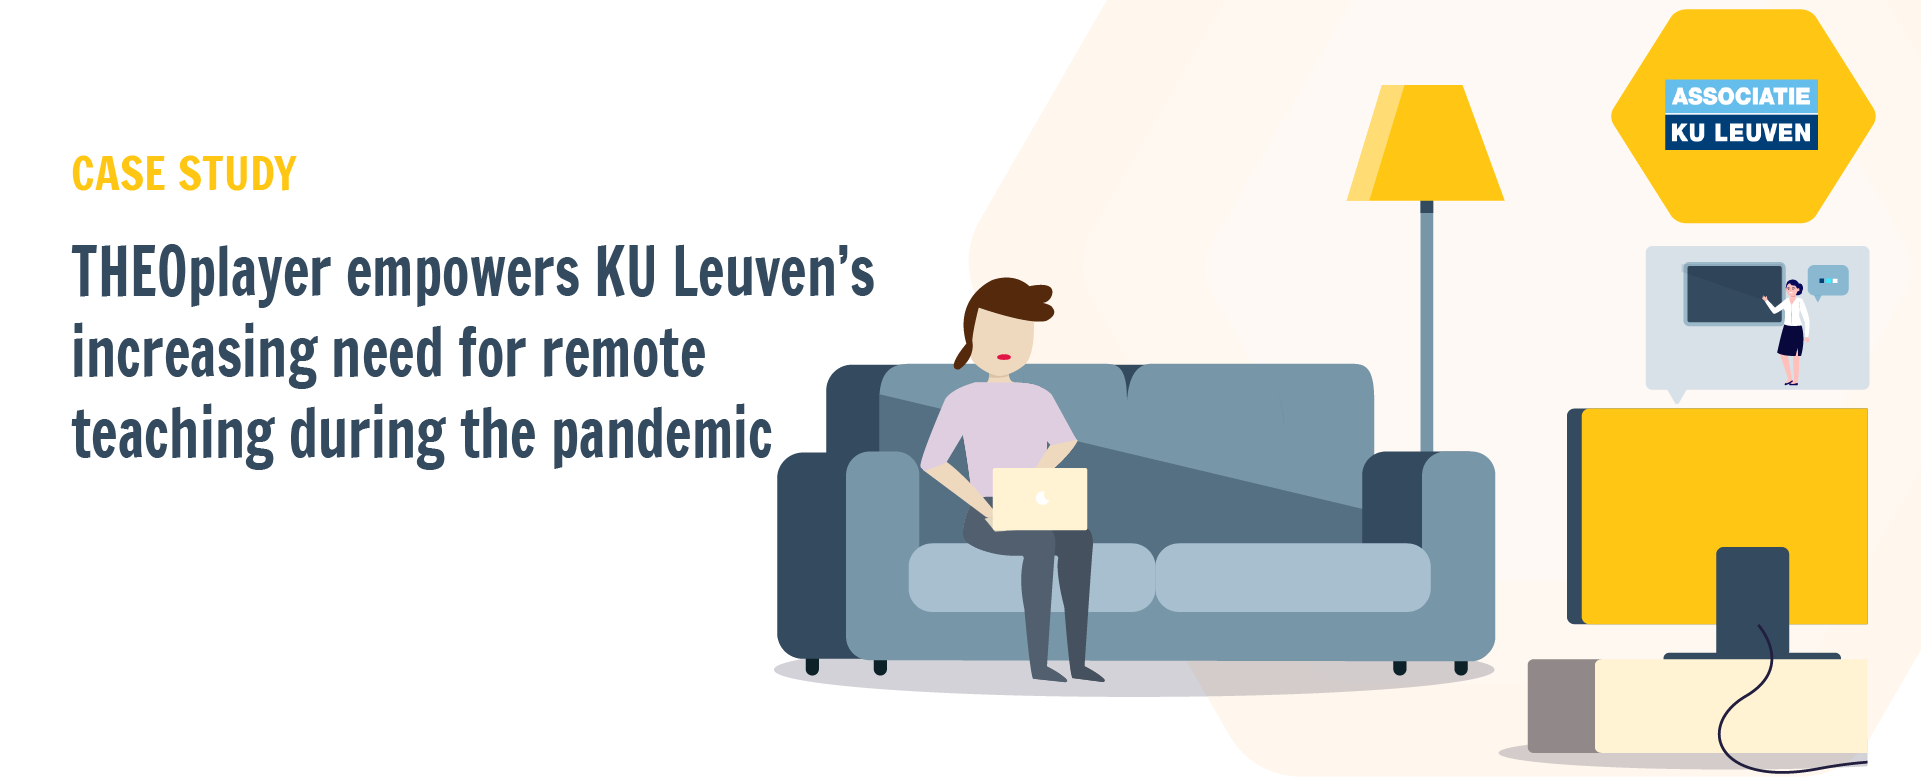 THEOplayer empowers KU Leuven’s increasing need for remote teaching